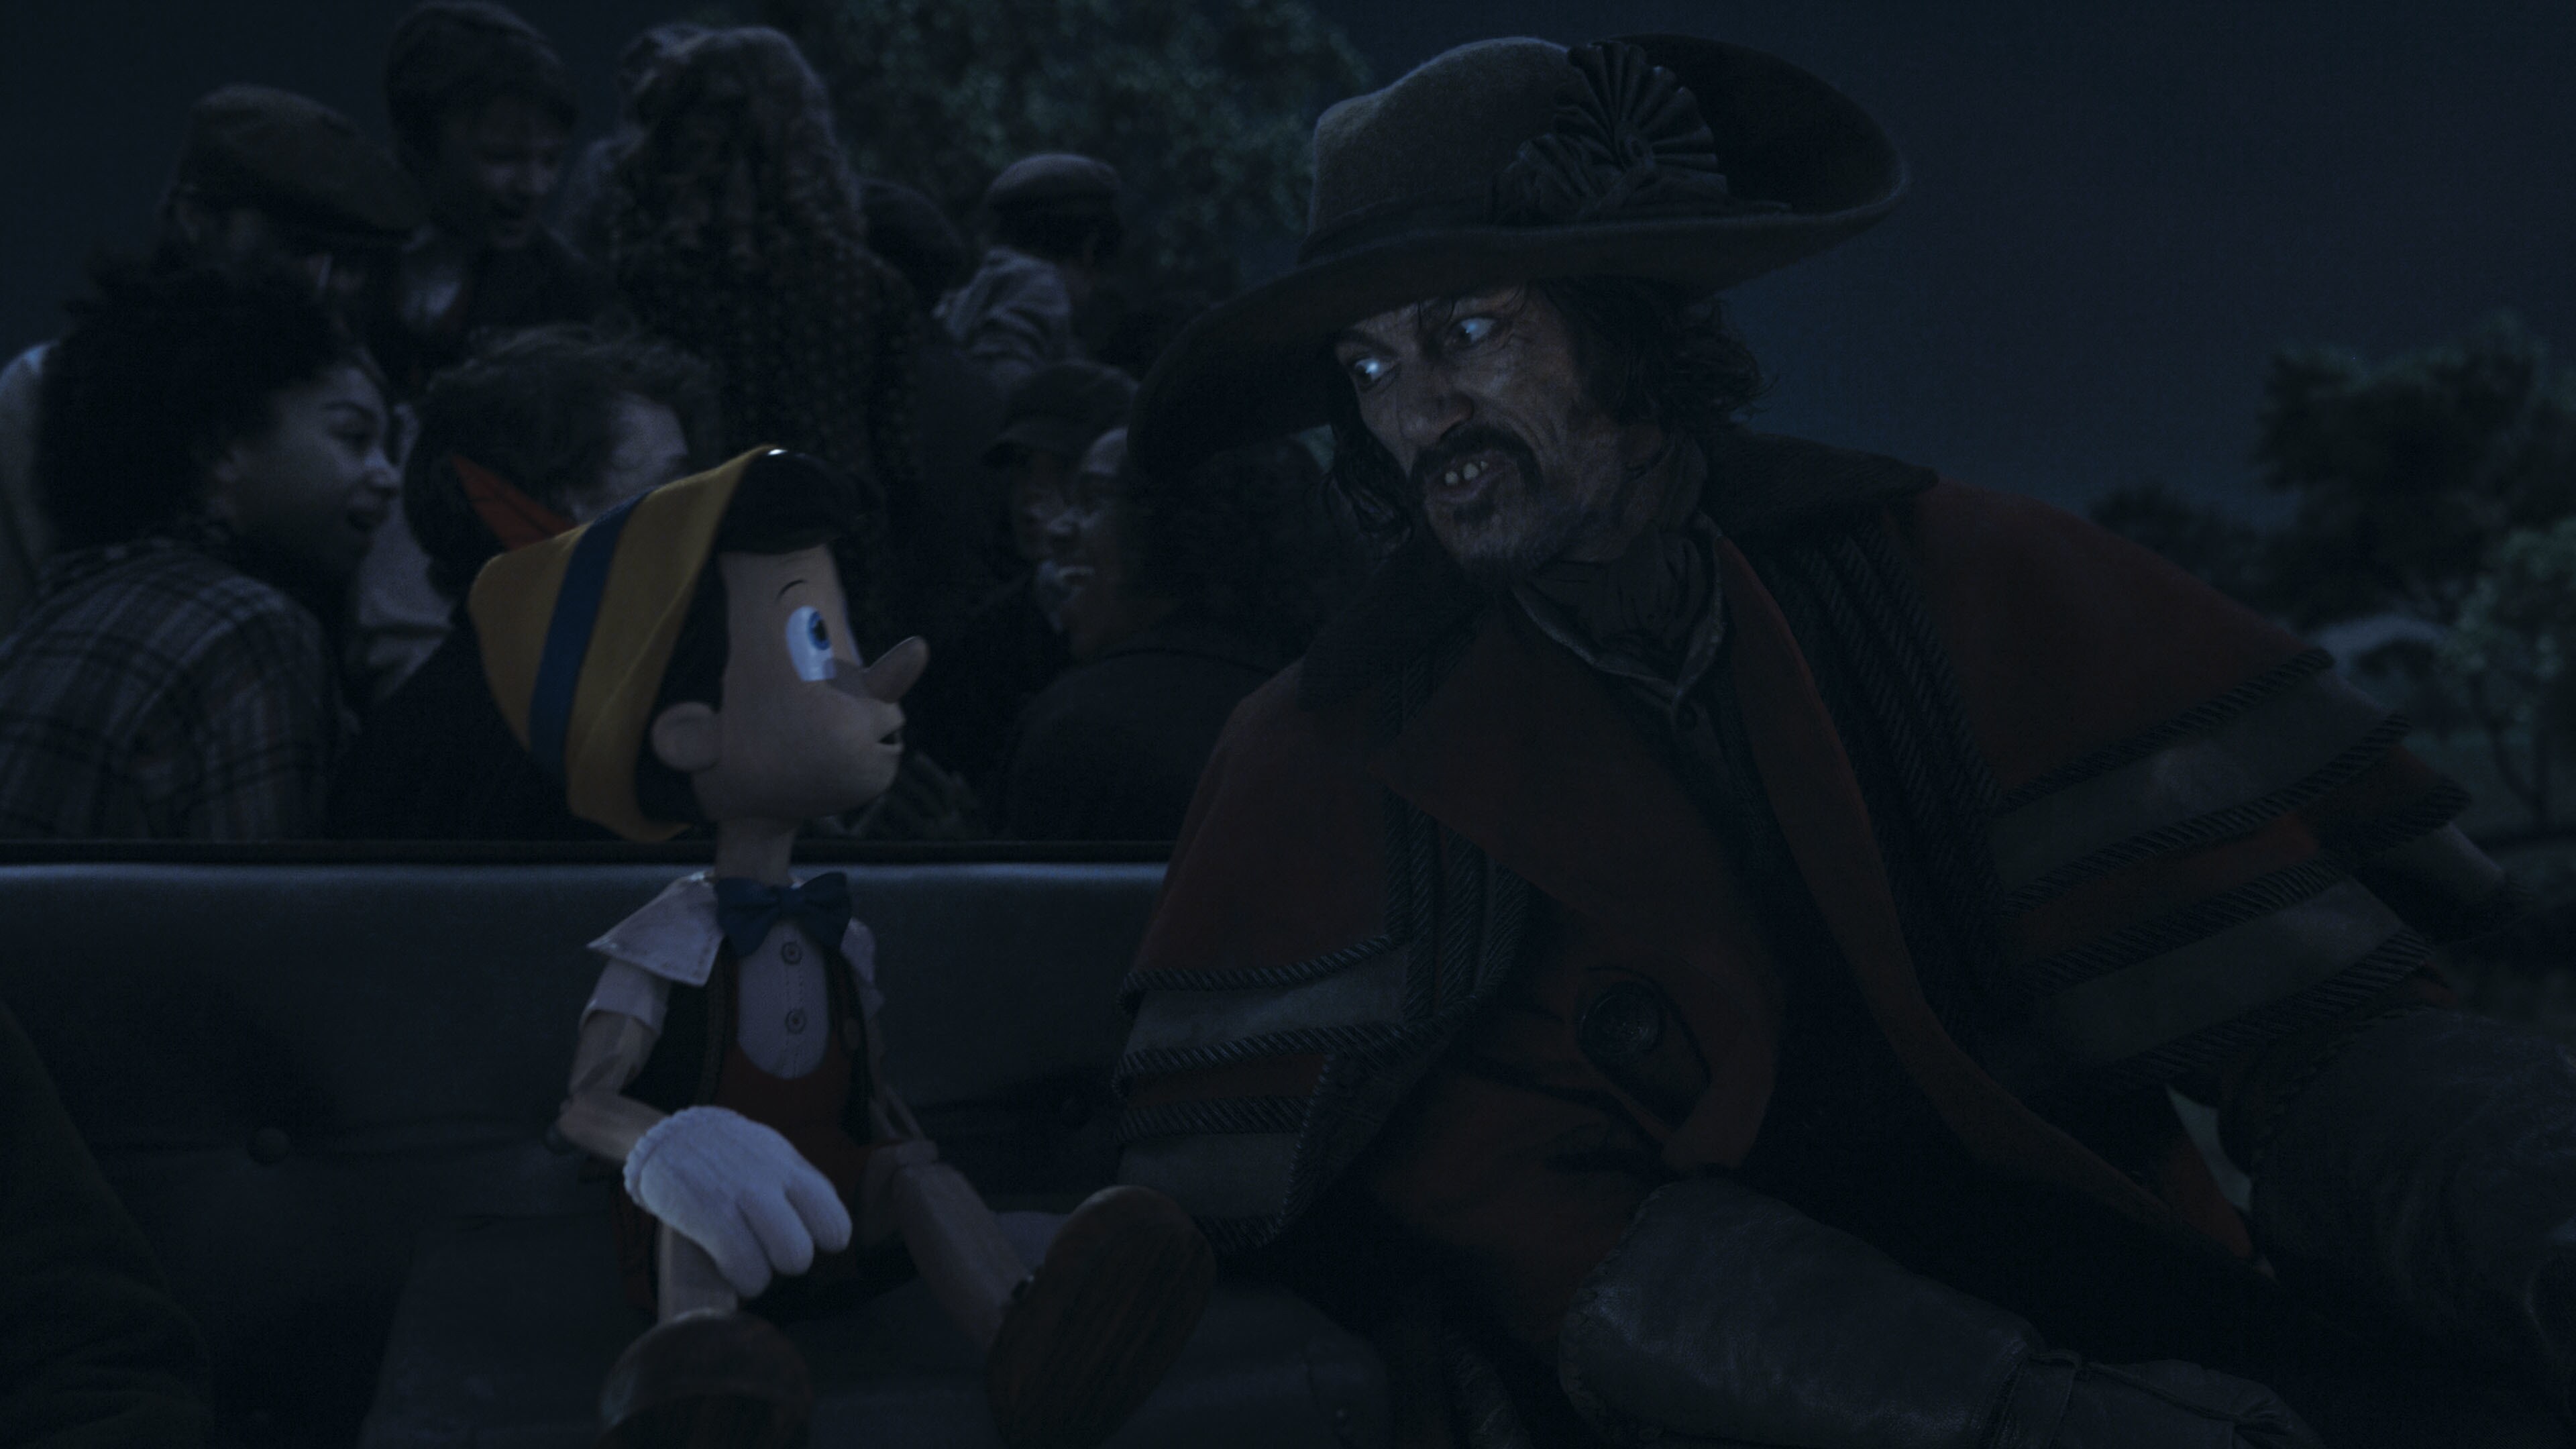 (L-R): Pinocchio (voiced by Benjamin Evan Ainsworth) and Luke Evans as The Coachman in Disney's live-action PINOCCHIO, exclusively on Disney+. Photo courtesy of Disney Enterprises, Inc. © 2022 Disney Enterprises, Inc. All Rights Reserved.